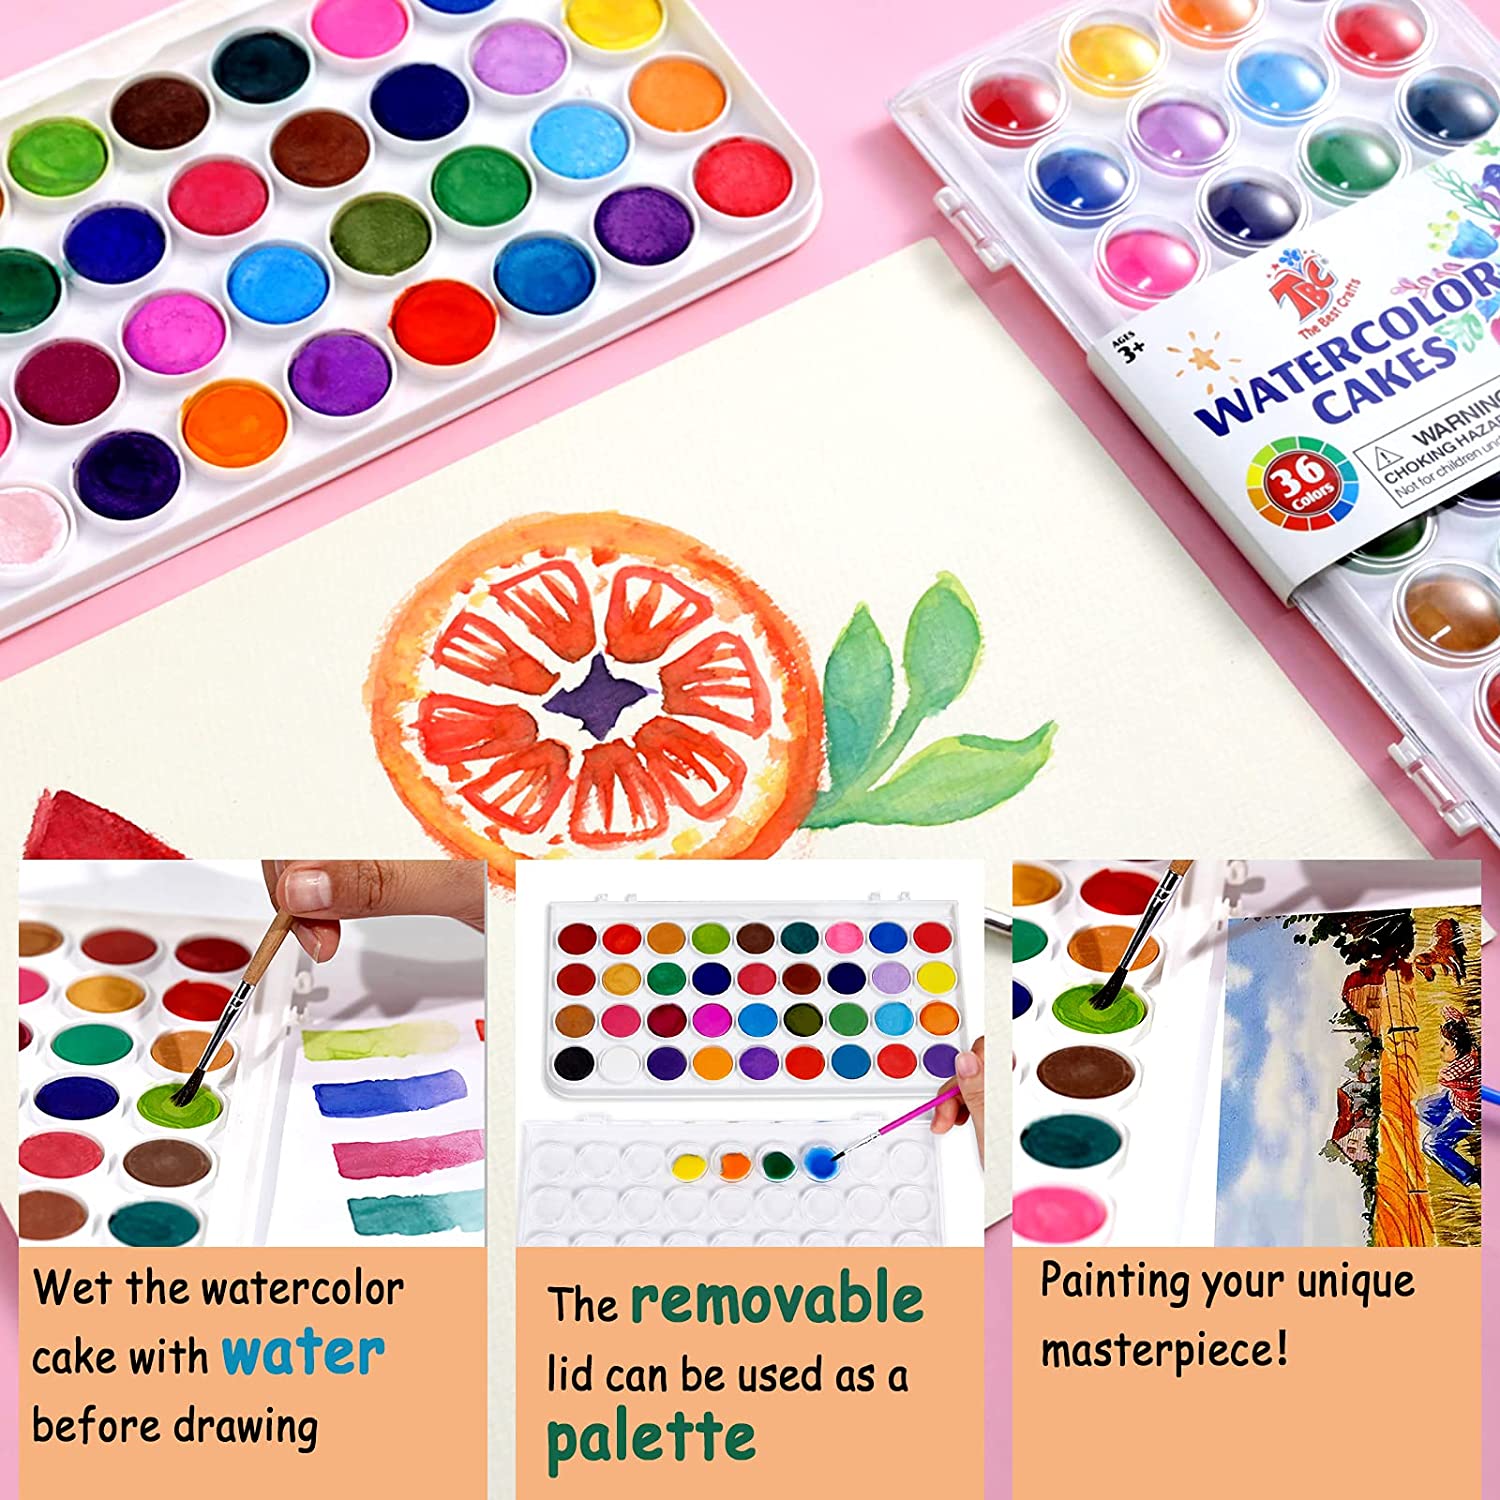 How to create a painting using the watercolours from the TBC Tempera washable kids paint - Stationery Island